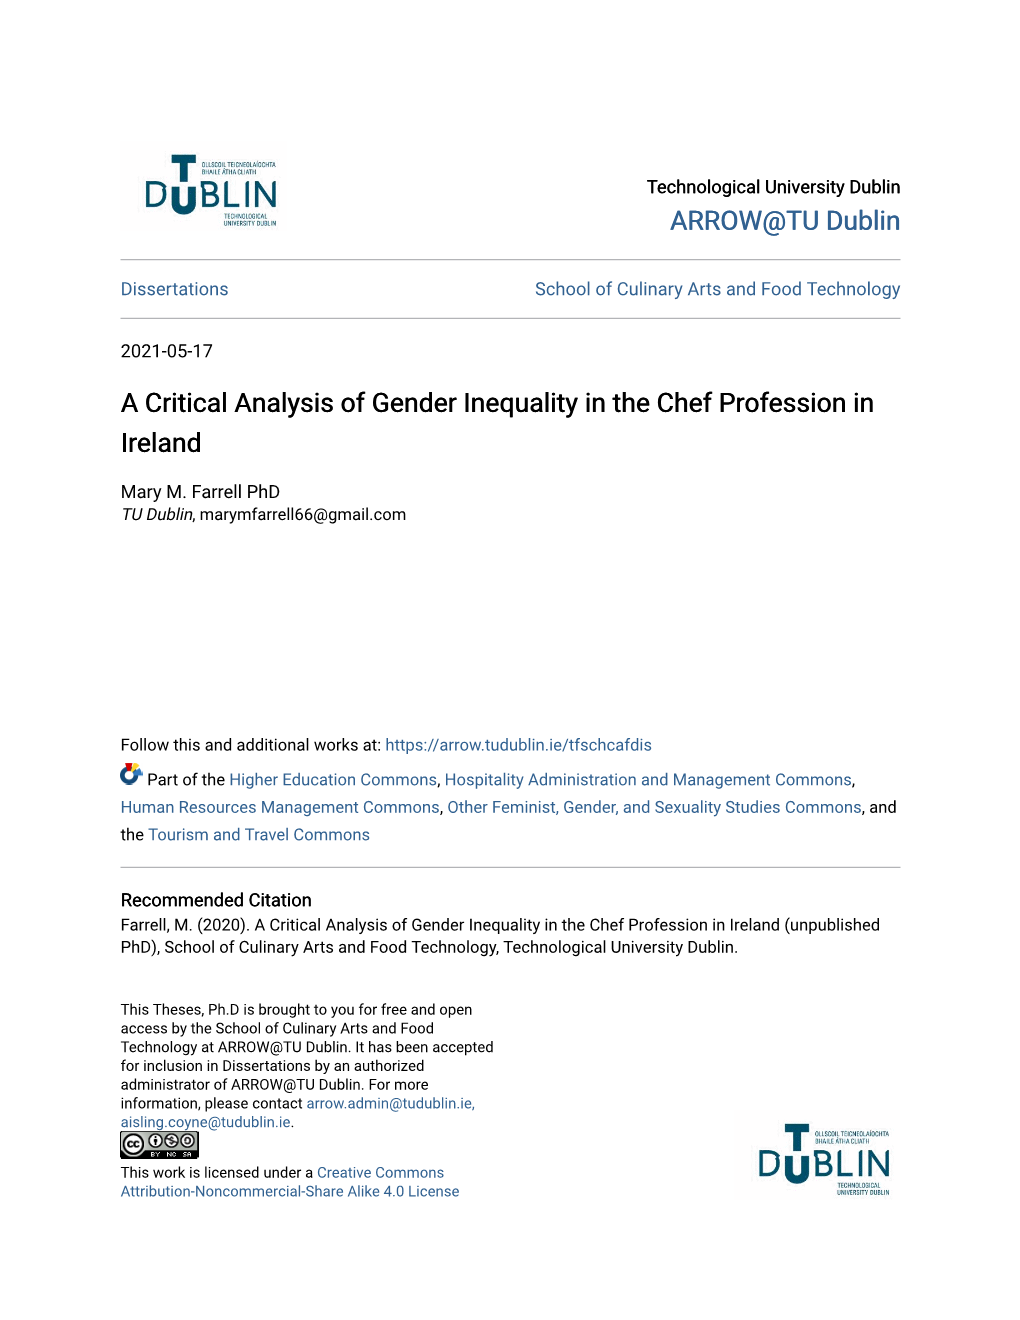 A Critical Analysis of Gender Inequality in the Chef Profession in Ireland